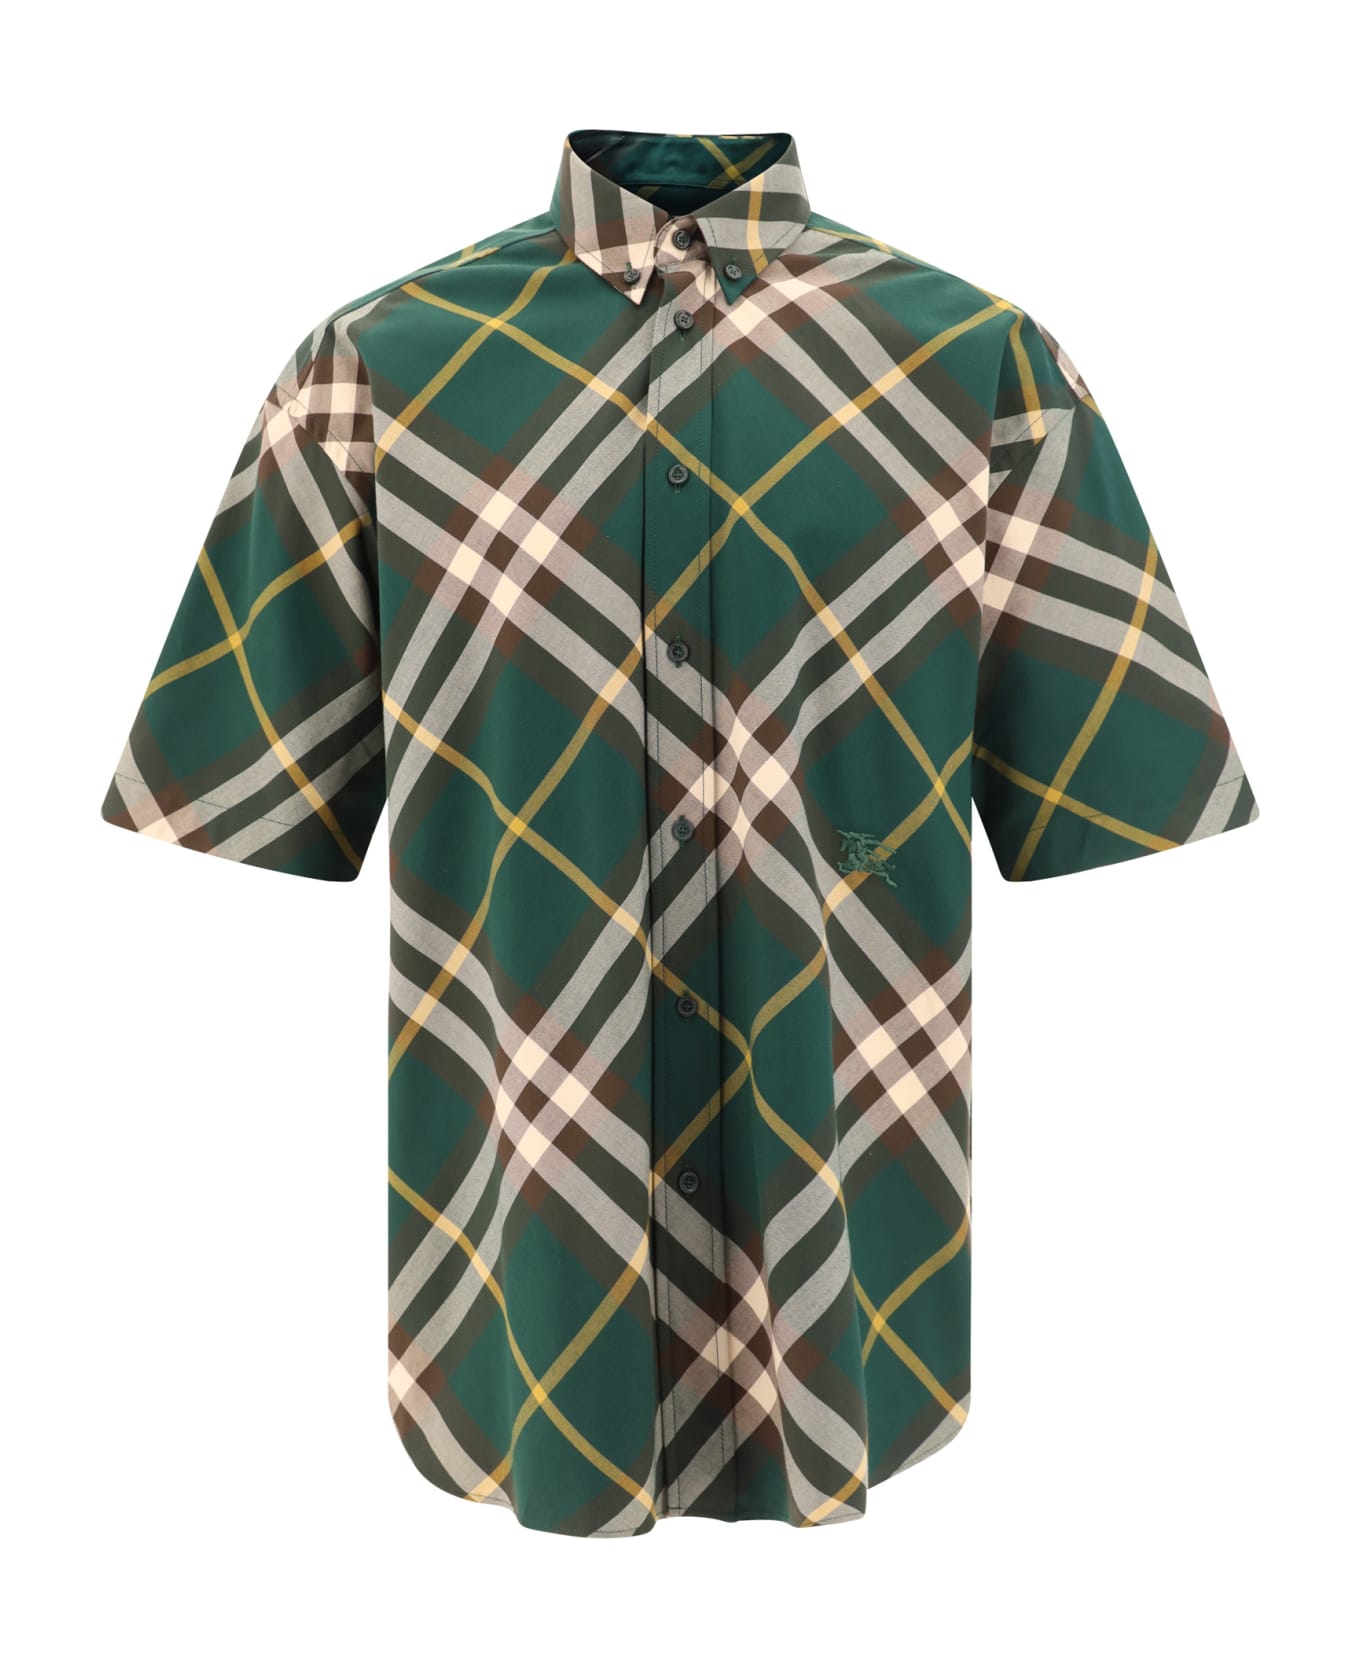 Burberry Casual Shirt - Ivy Ip Check